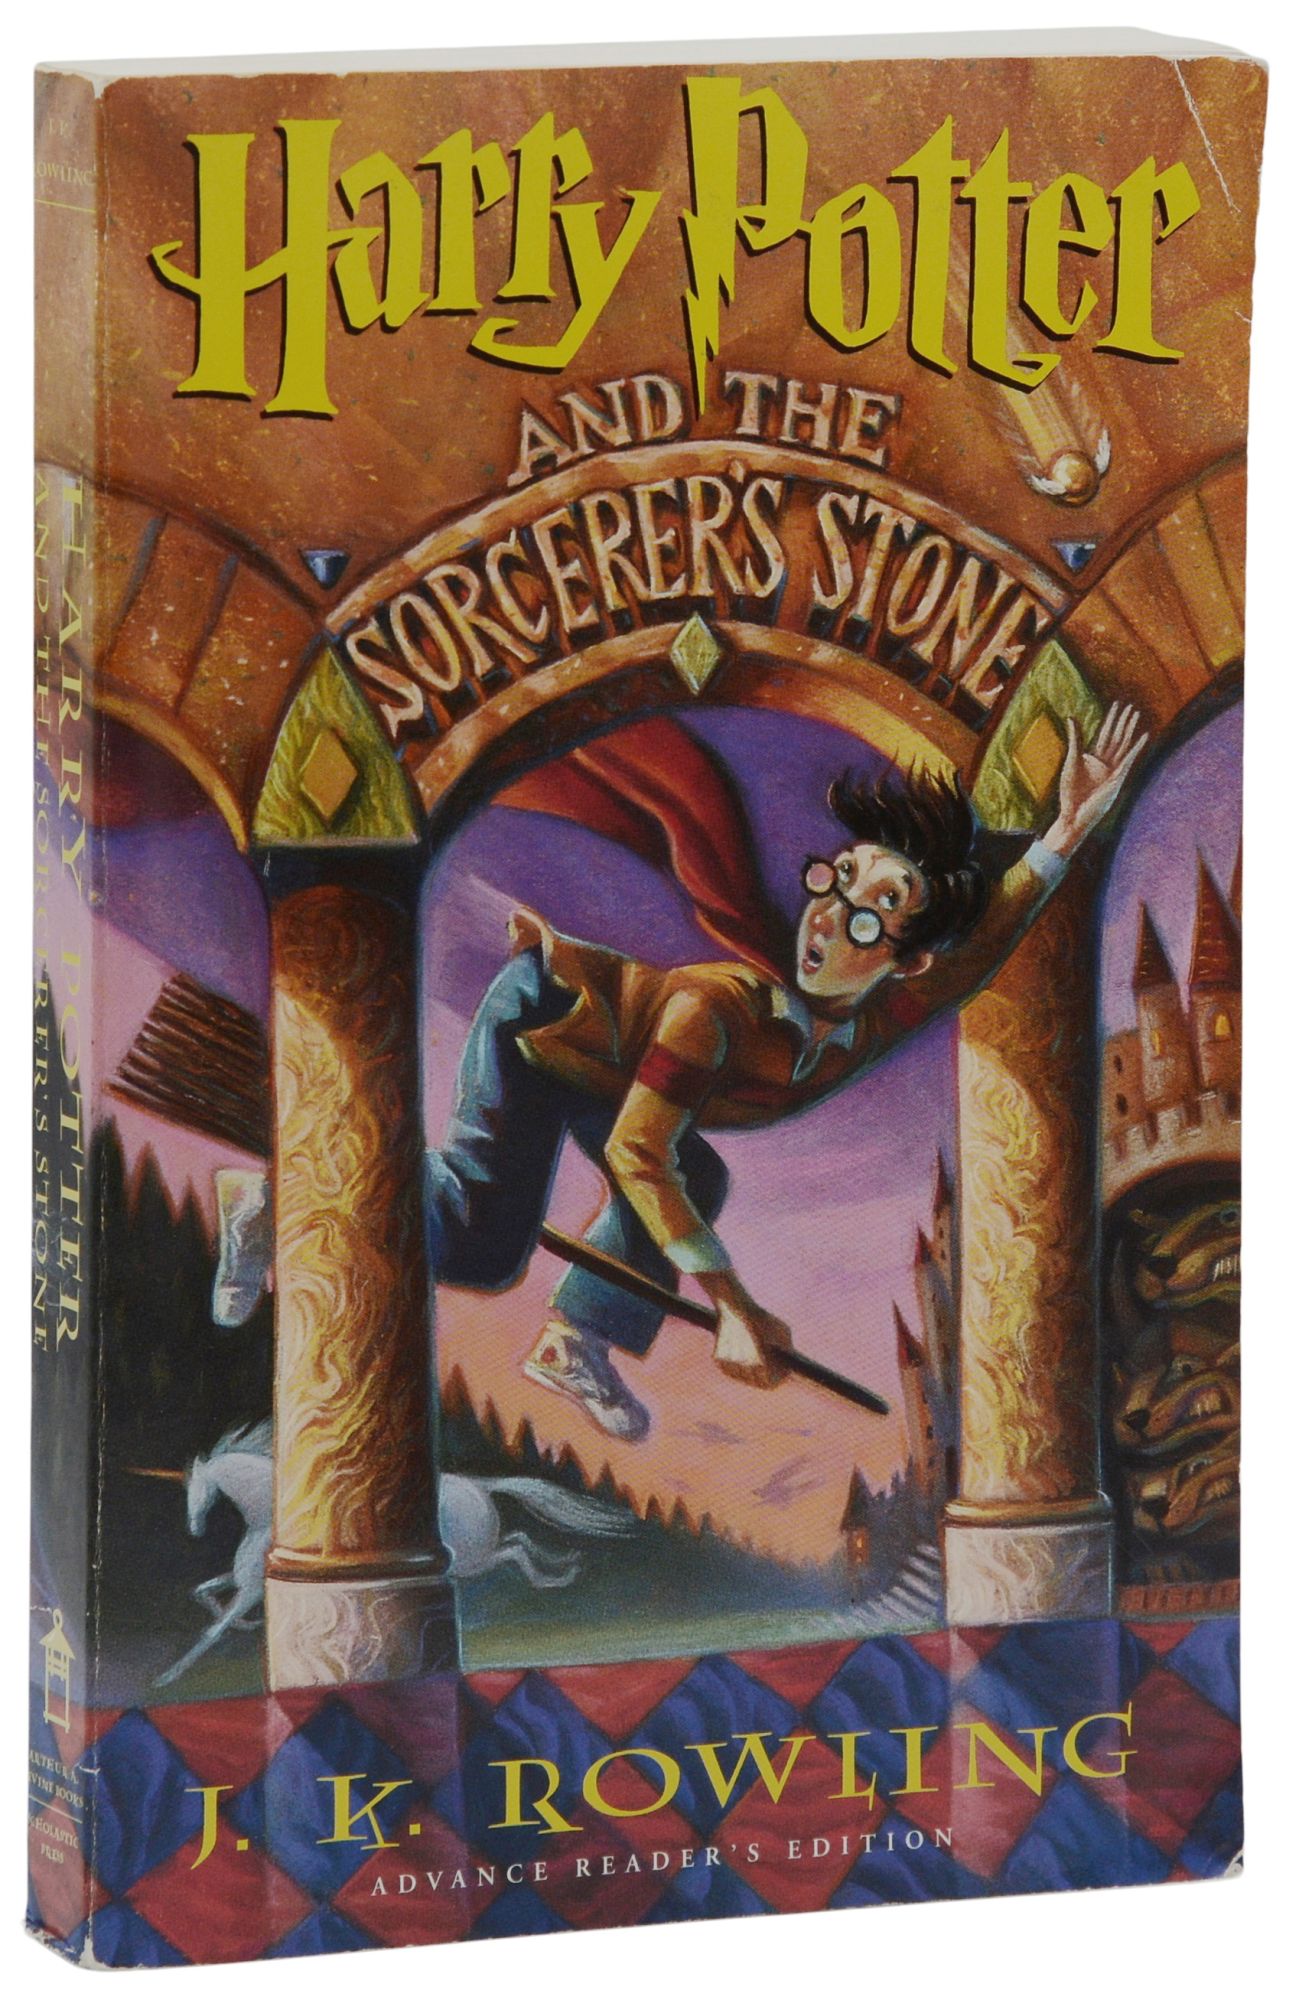 Harry Potter and the Sorcerer's Stone, J. K. Rowling